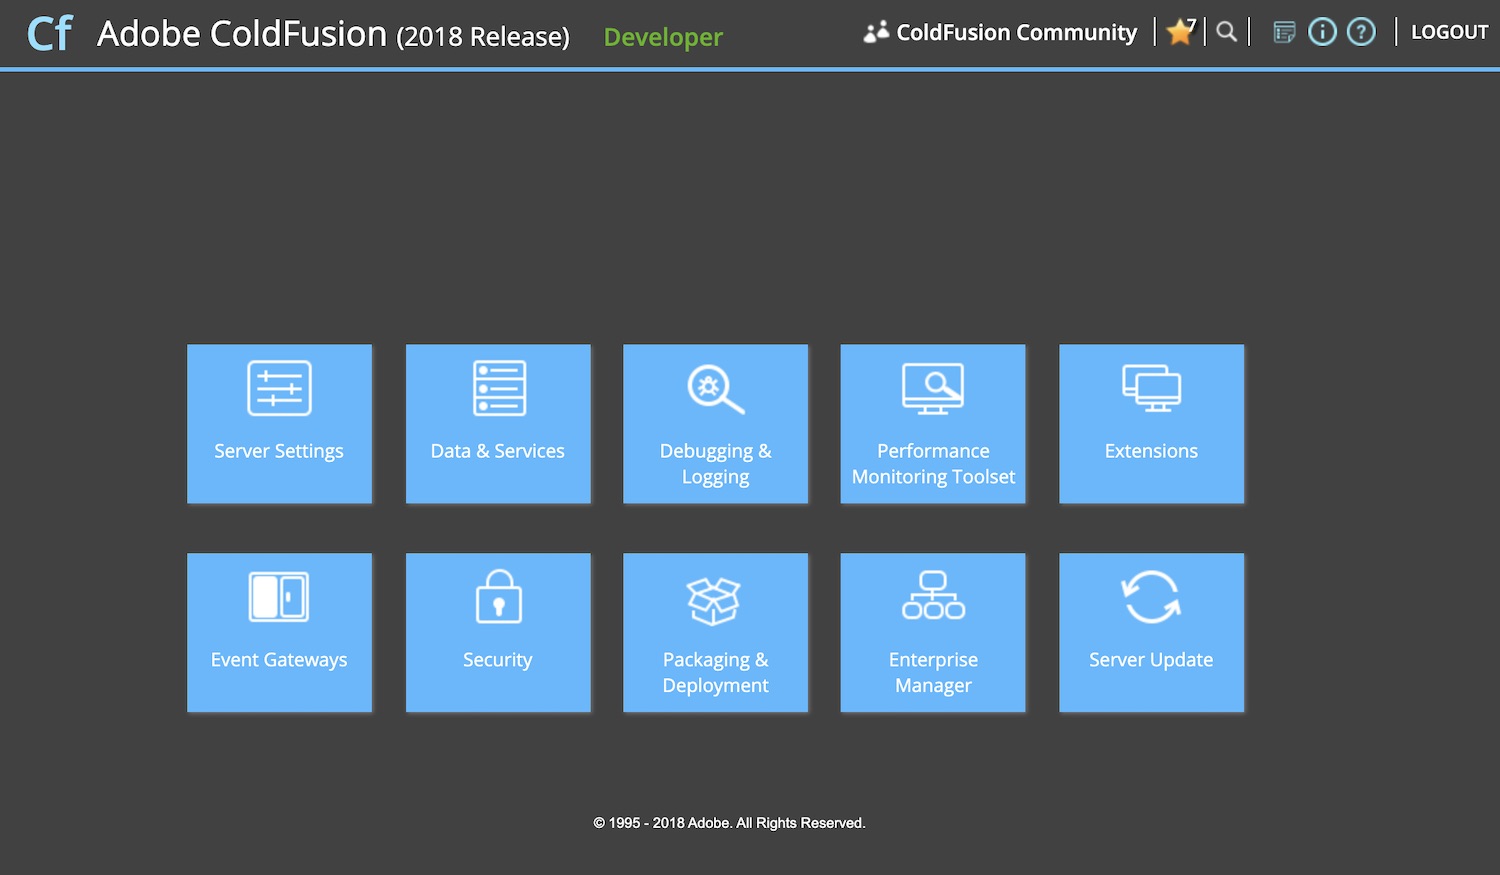 Screenshot of the ColdFusion 2018 Administrator